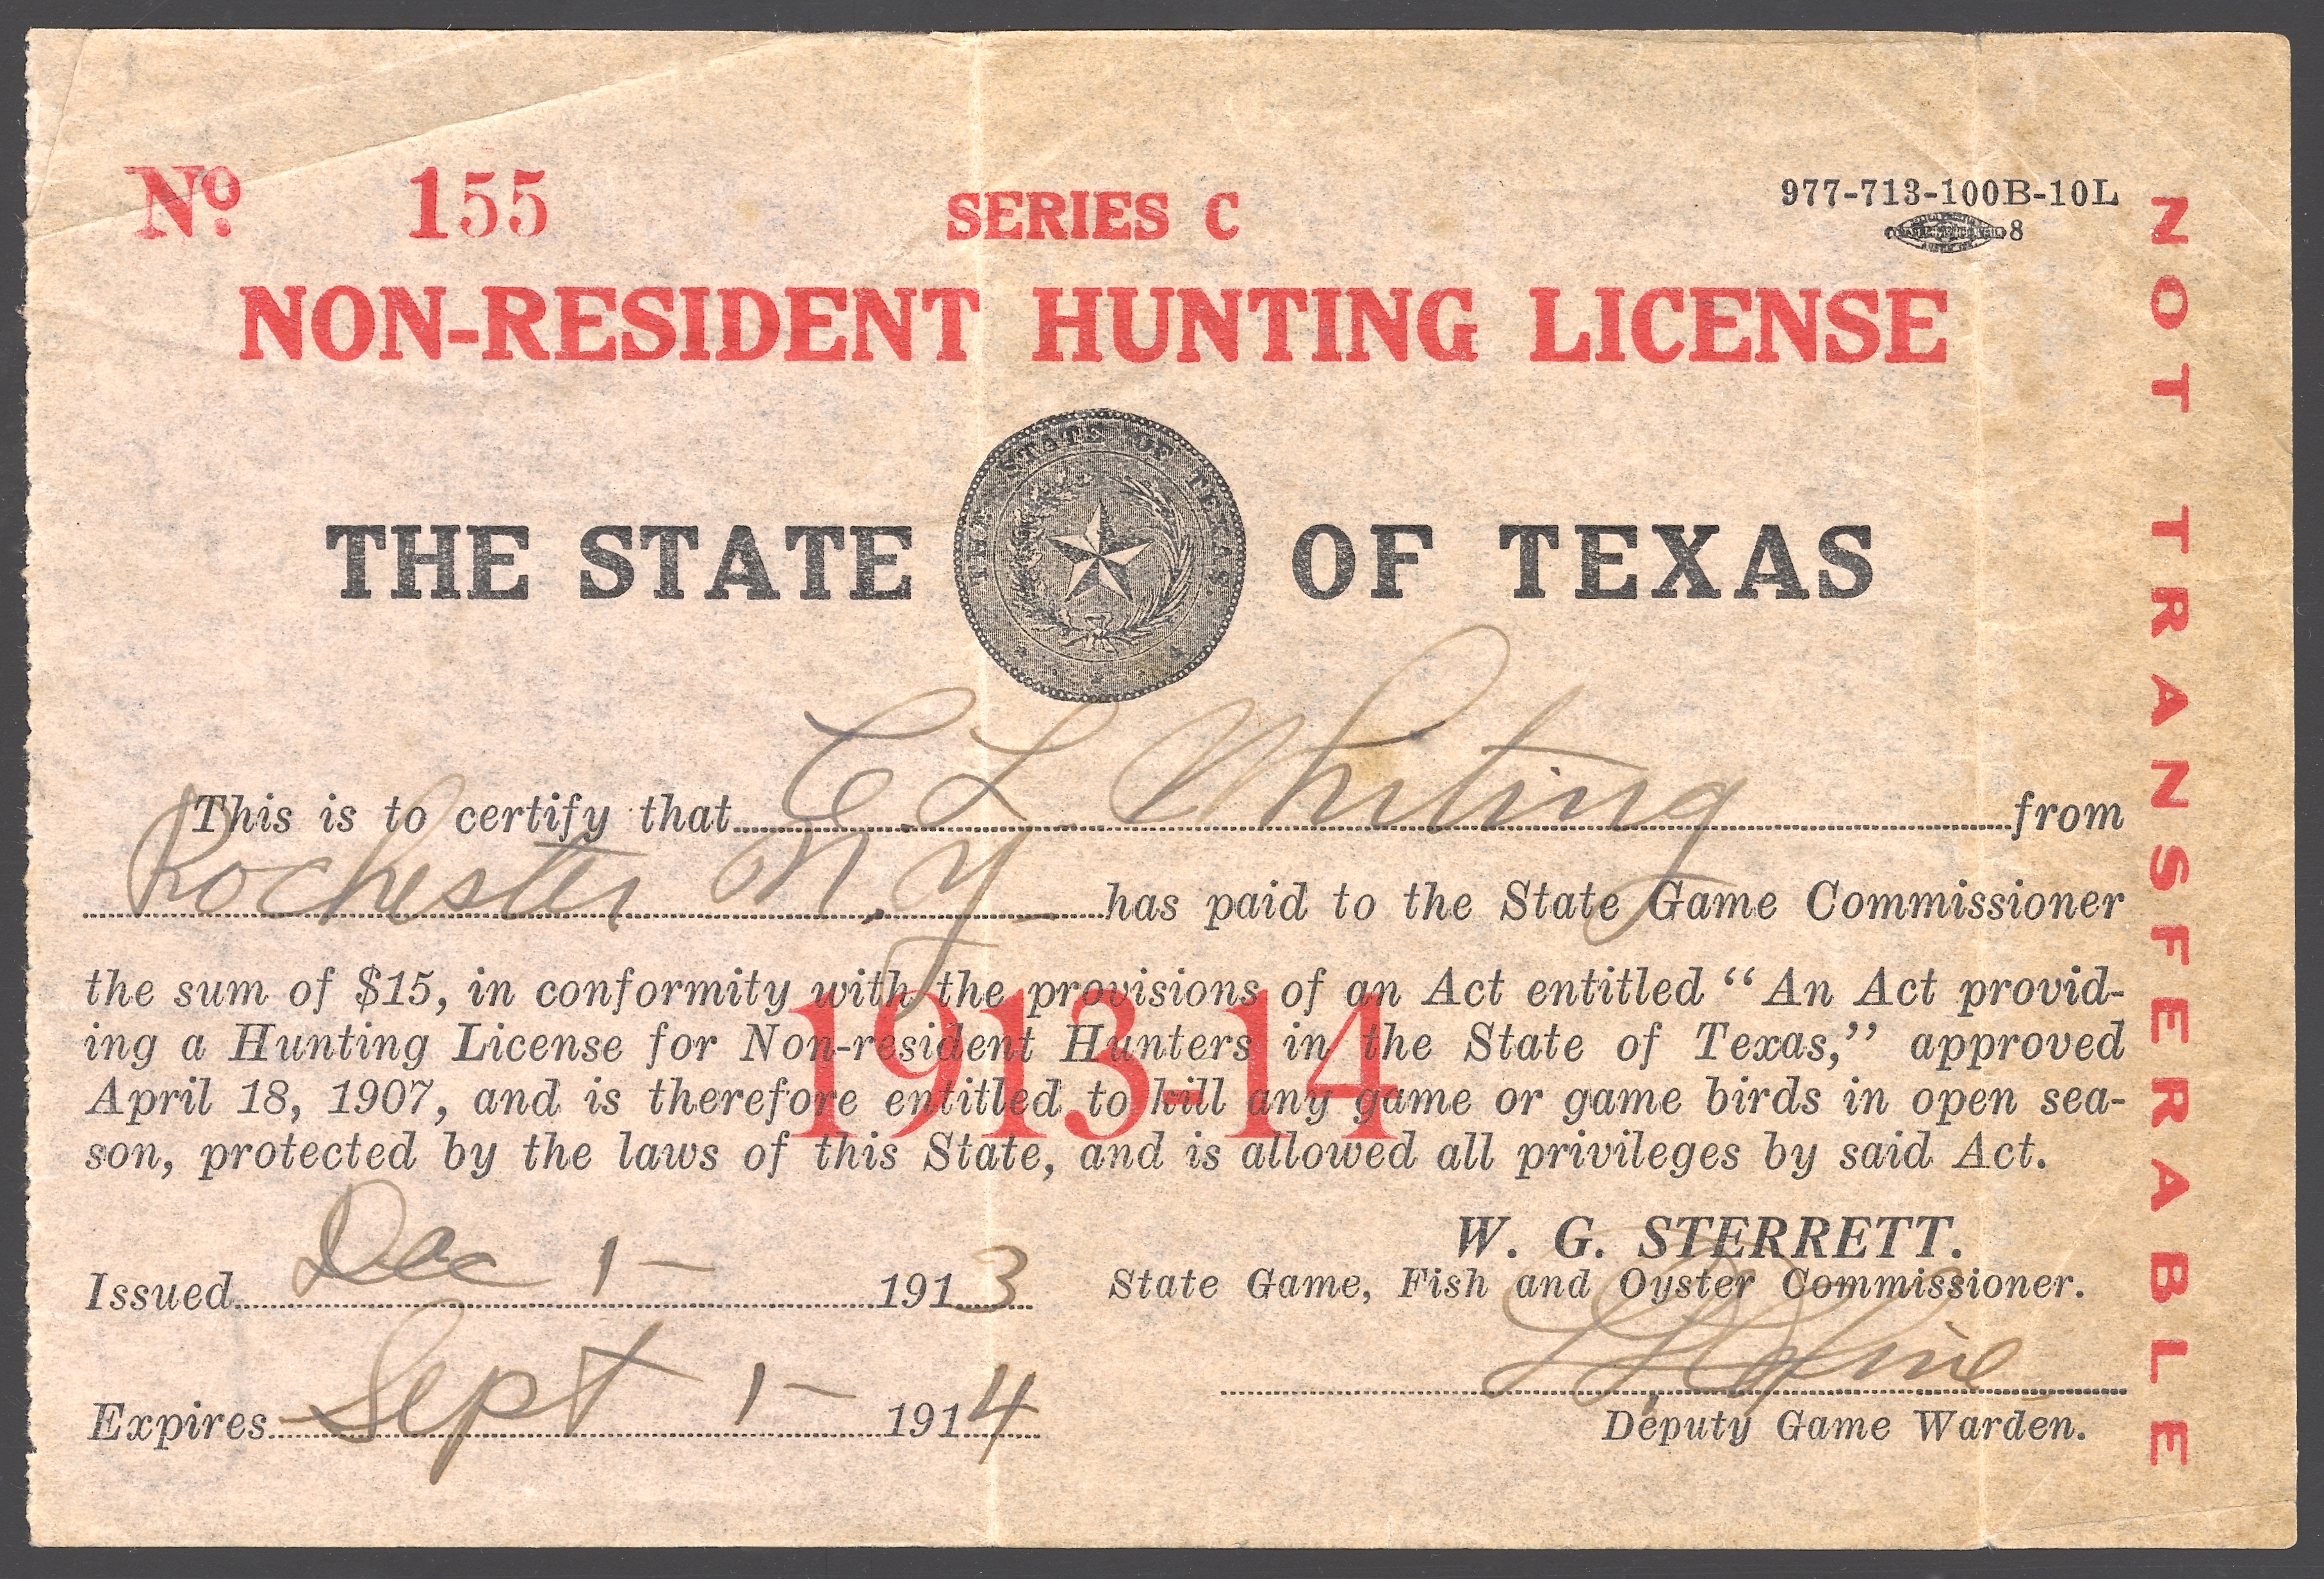 1913-14 Texas Non Resident Hunting License